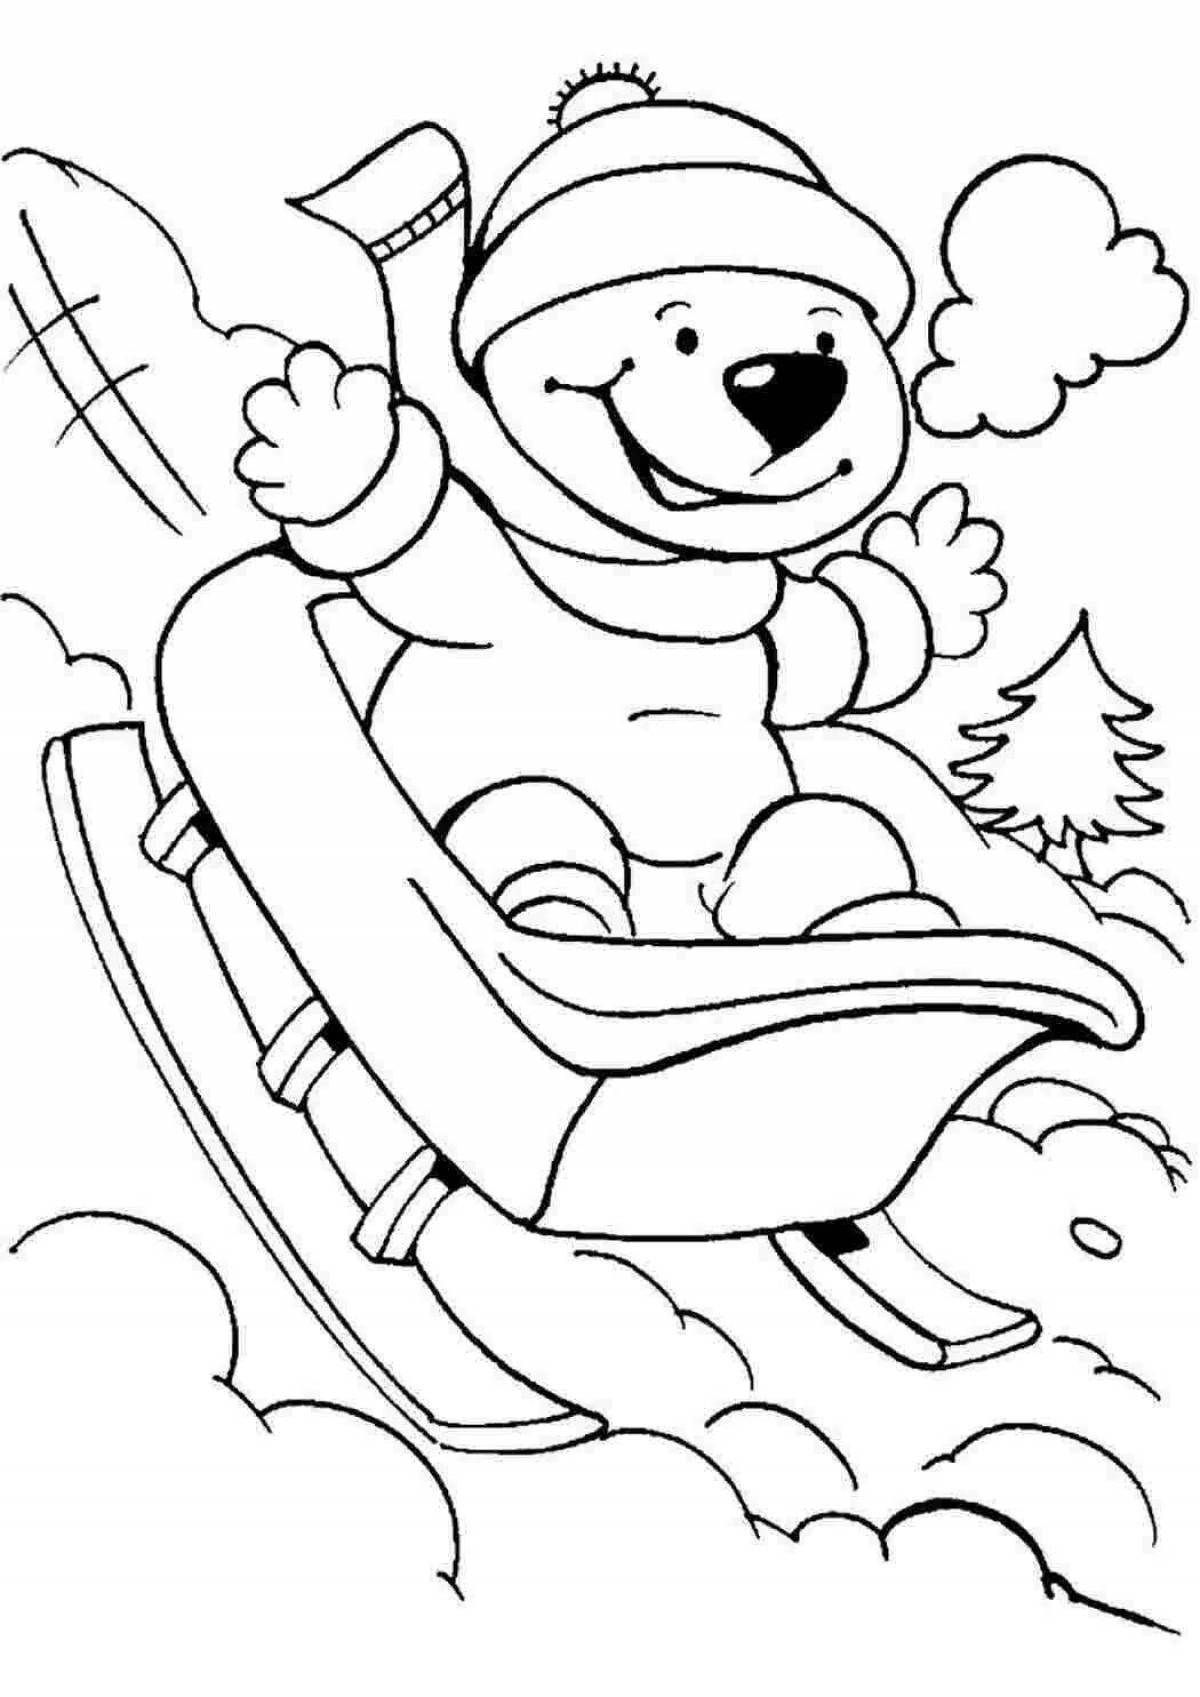 Outstanding sleigh coloring book for 4-5 year olds